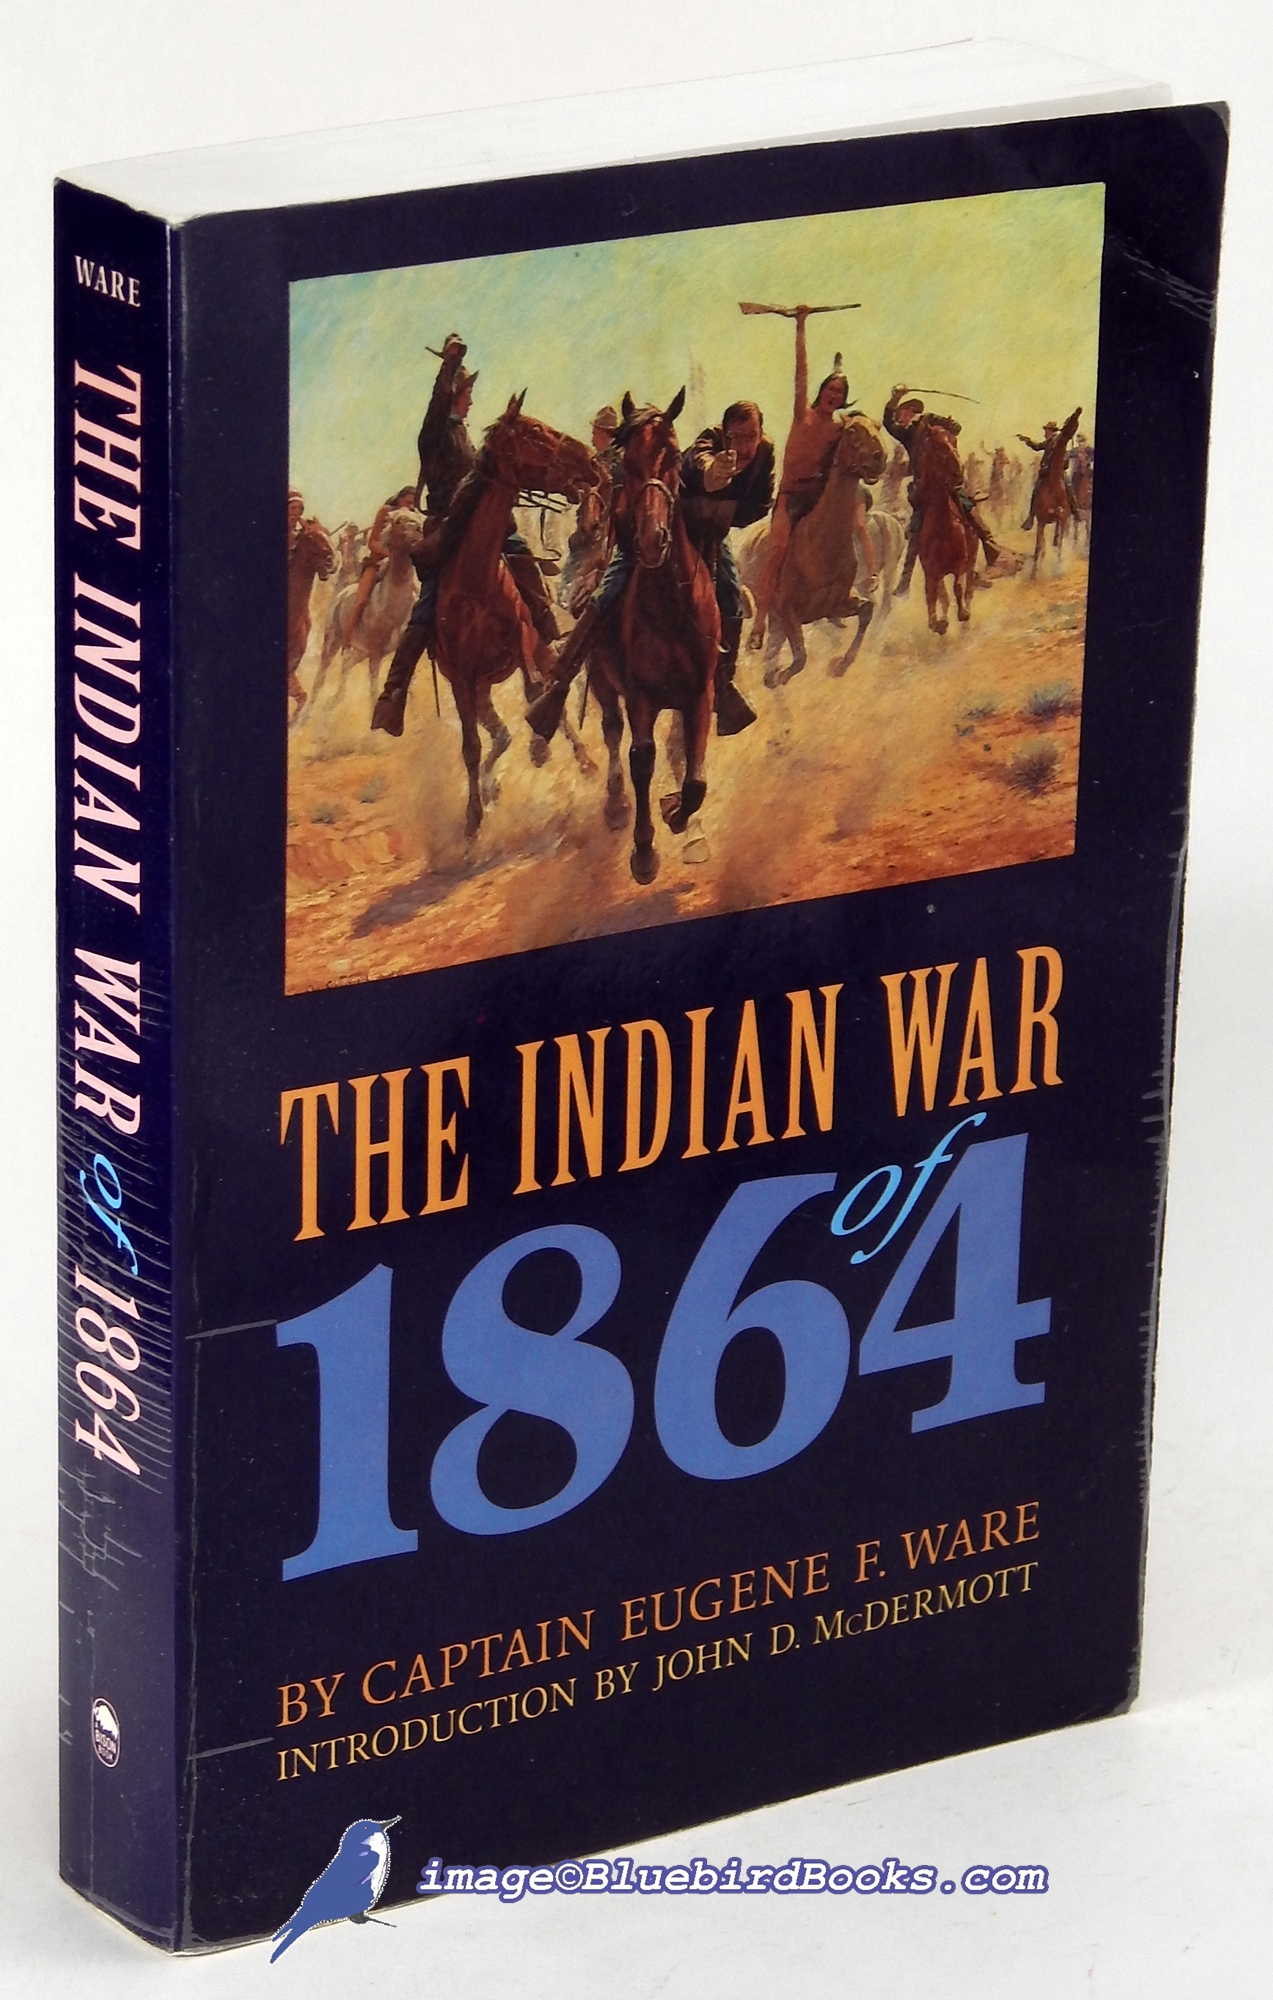 WARE, CAPTAIN EUGENE F. - The Indian War of 1864